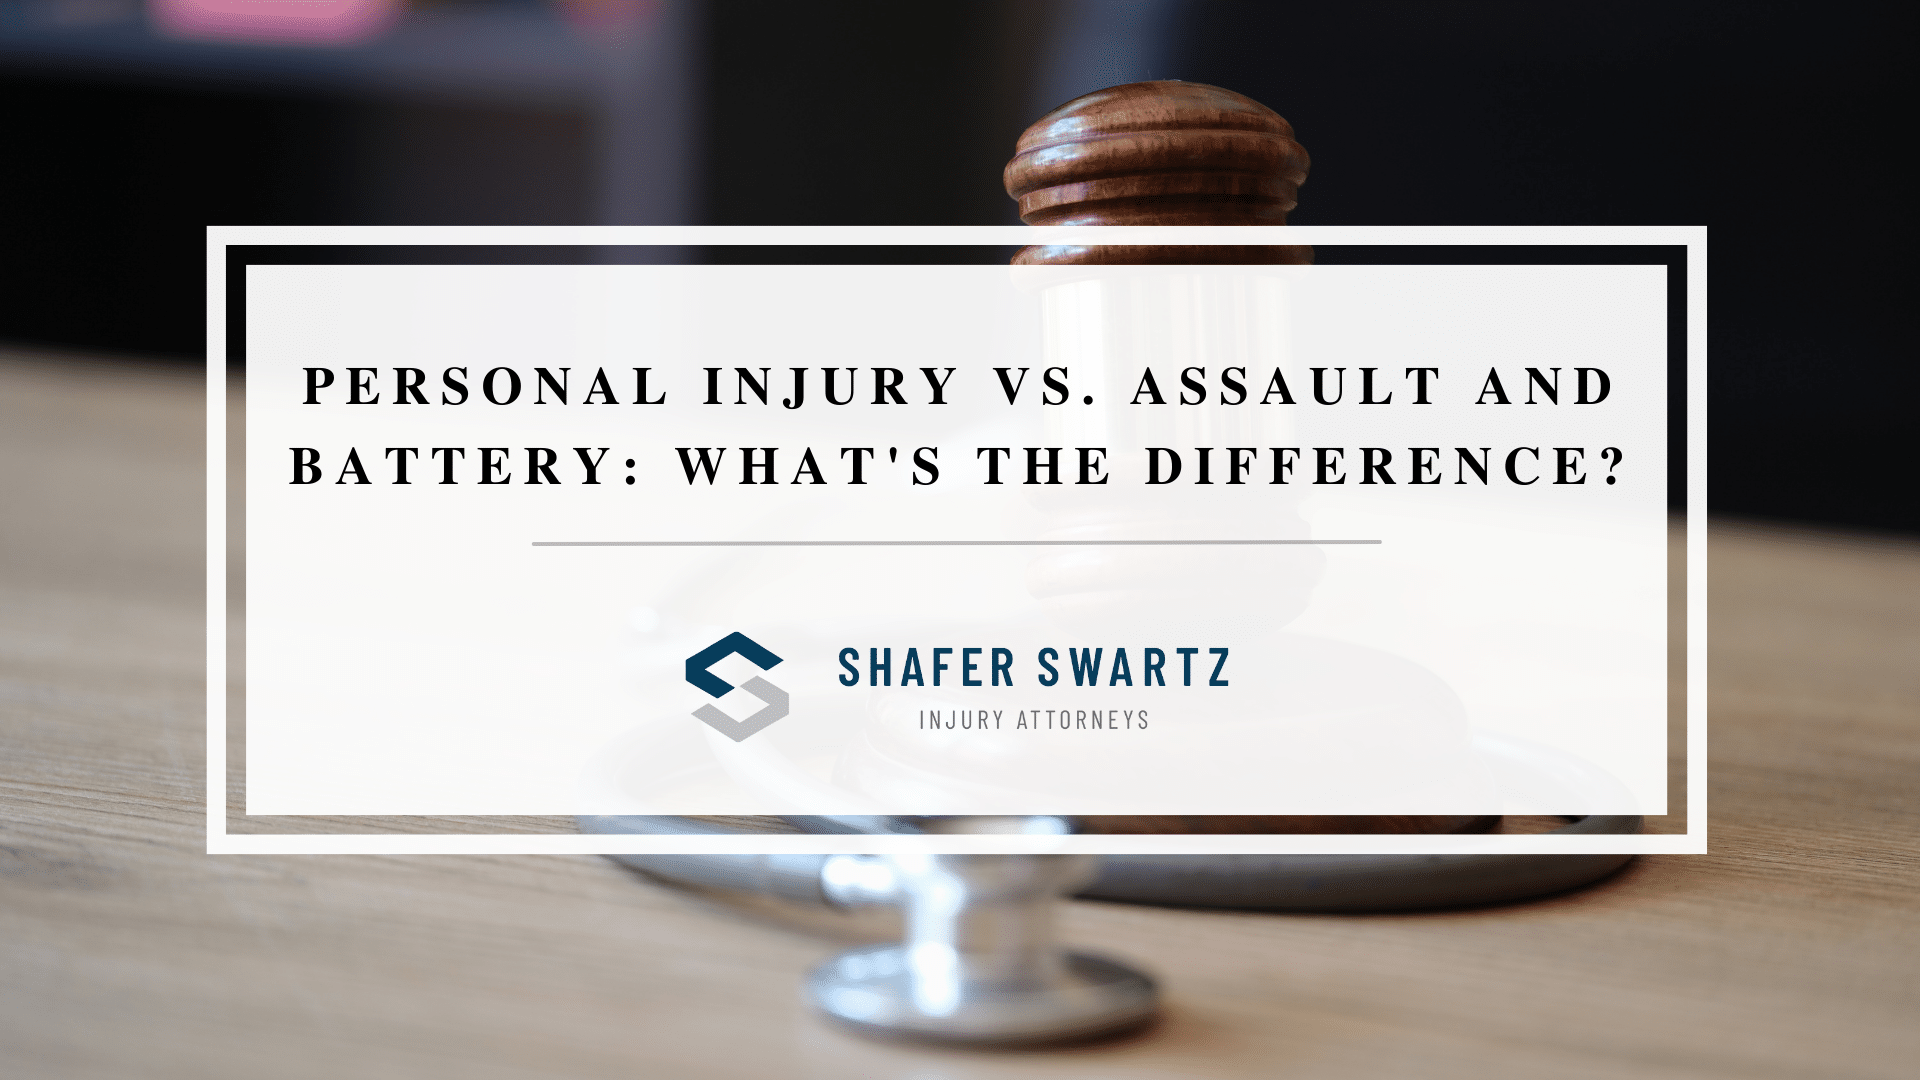 Featured image of personal injury vs. assault and battery: what's the difference?